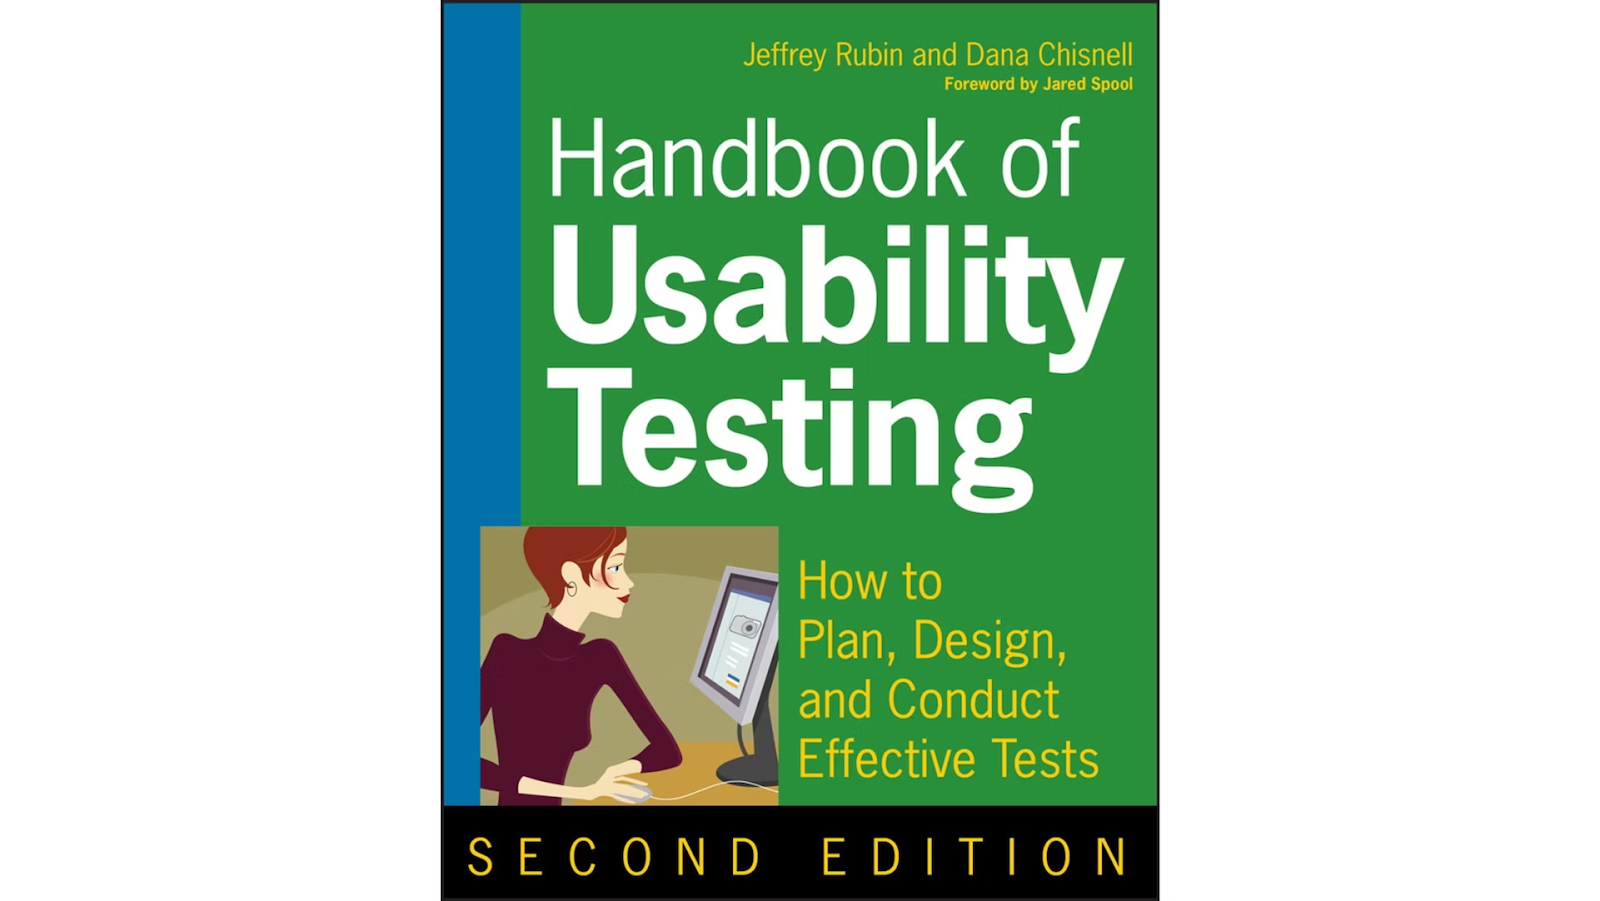 "The Handbook of Usability Testing" by Jeffrey Rubin and Dana Chisnell